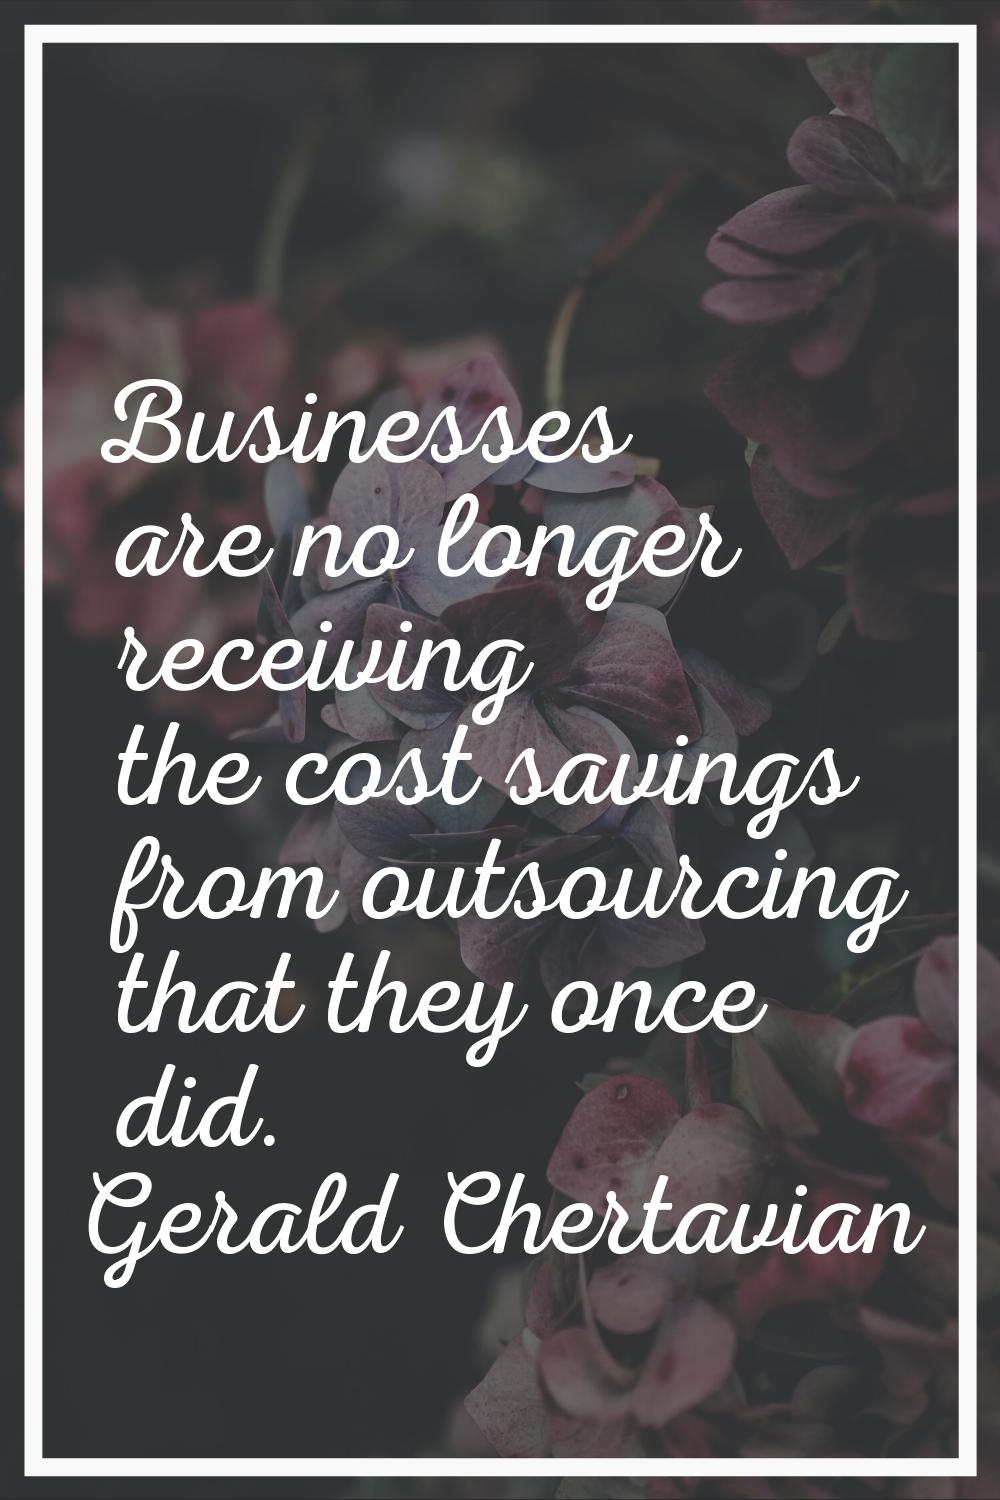 Businesses are no longer receiving the cost savings from outsourcing that they once did.